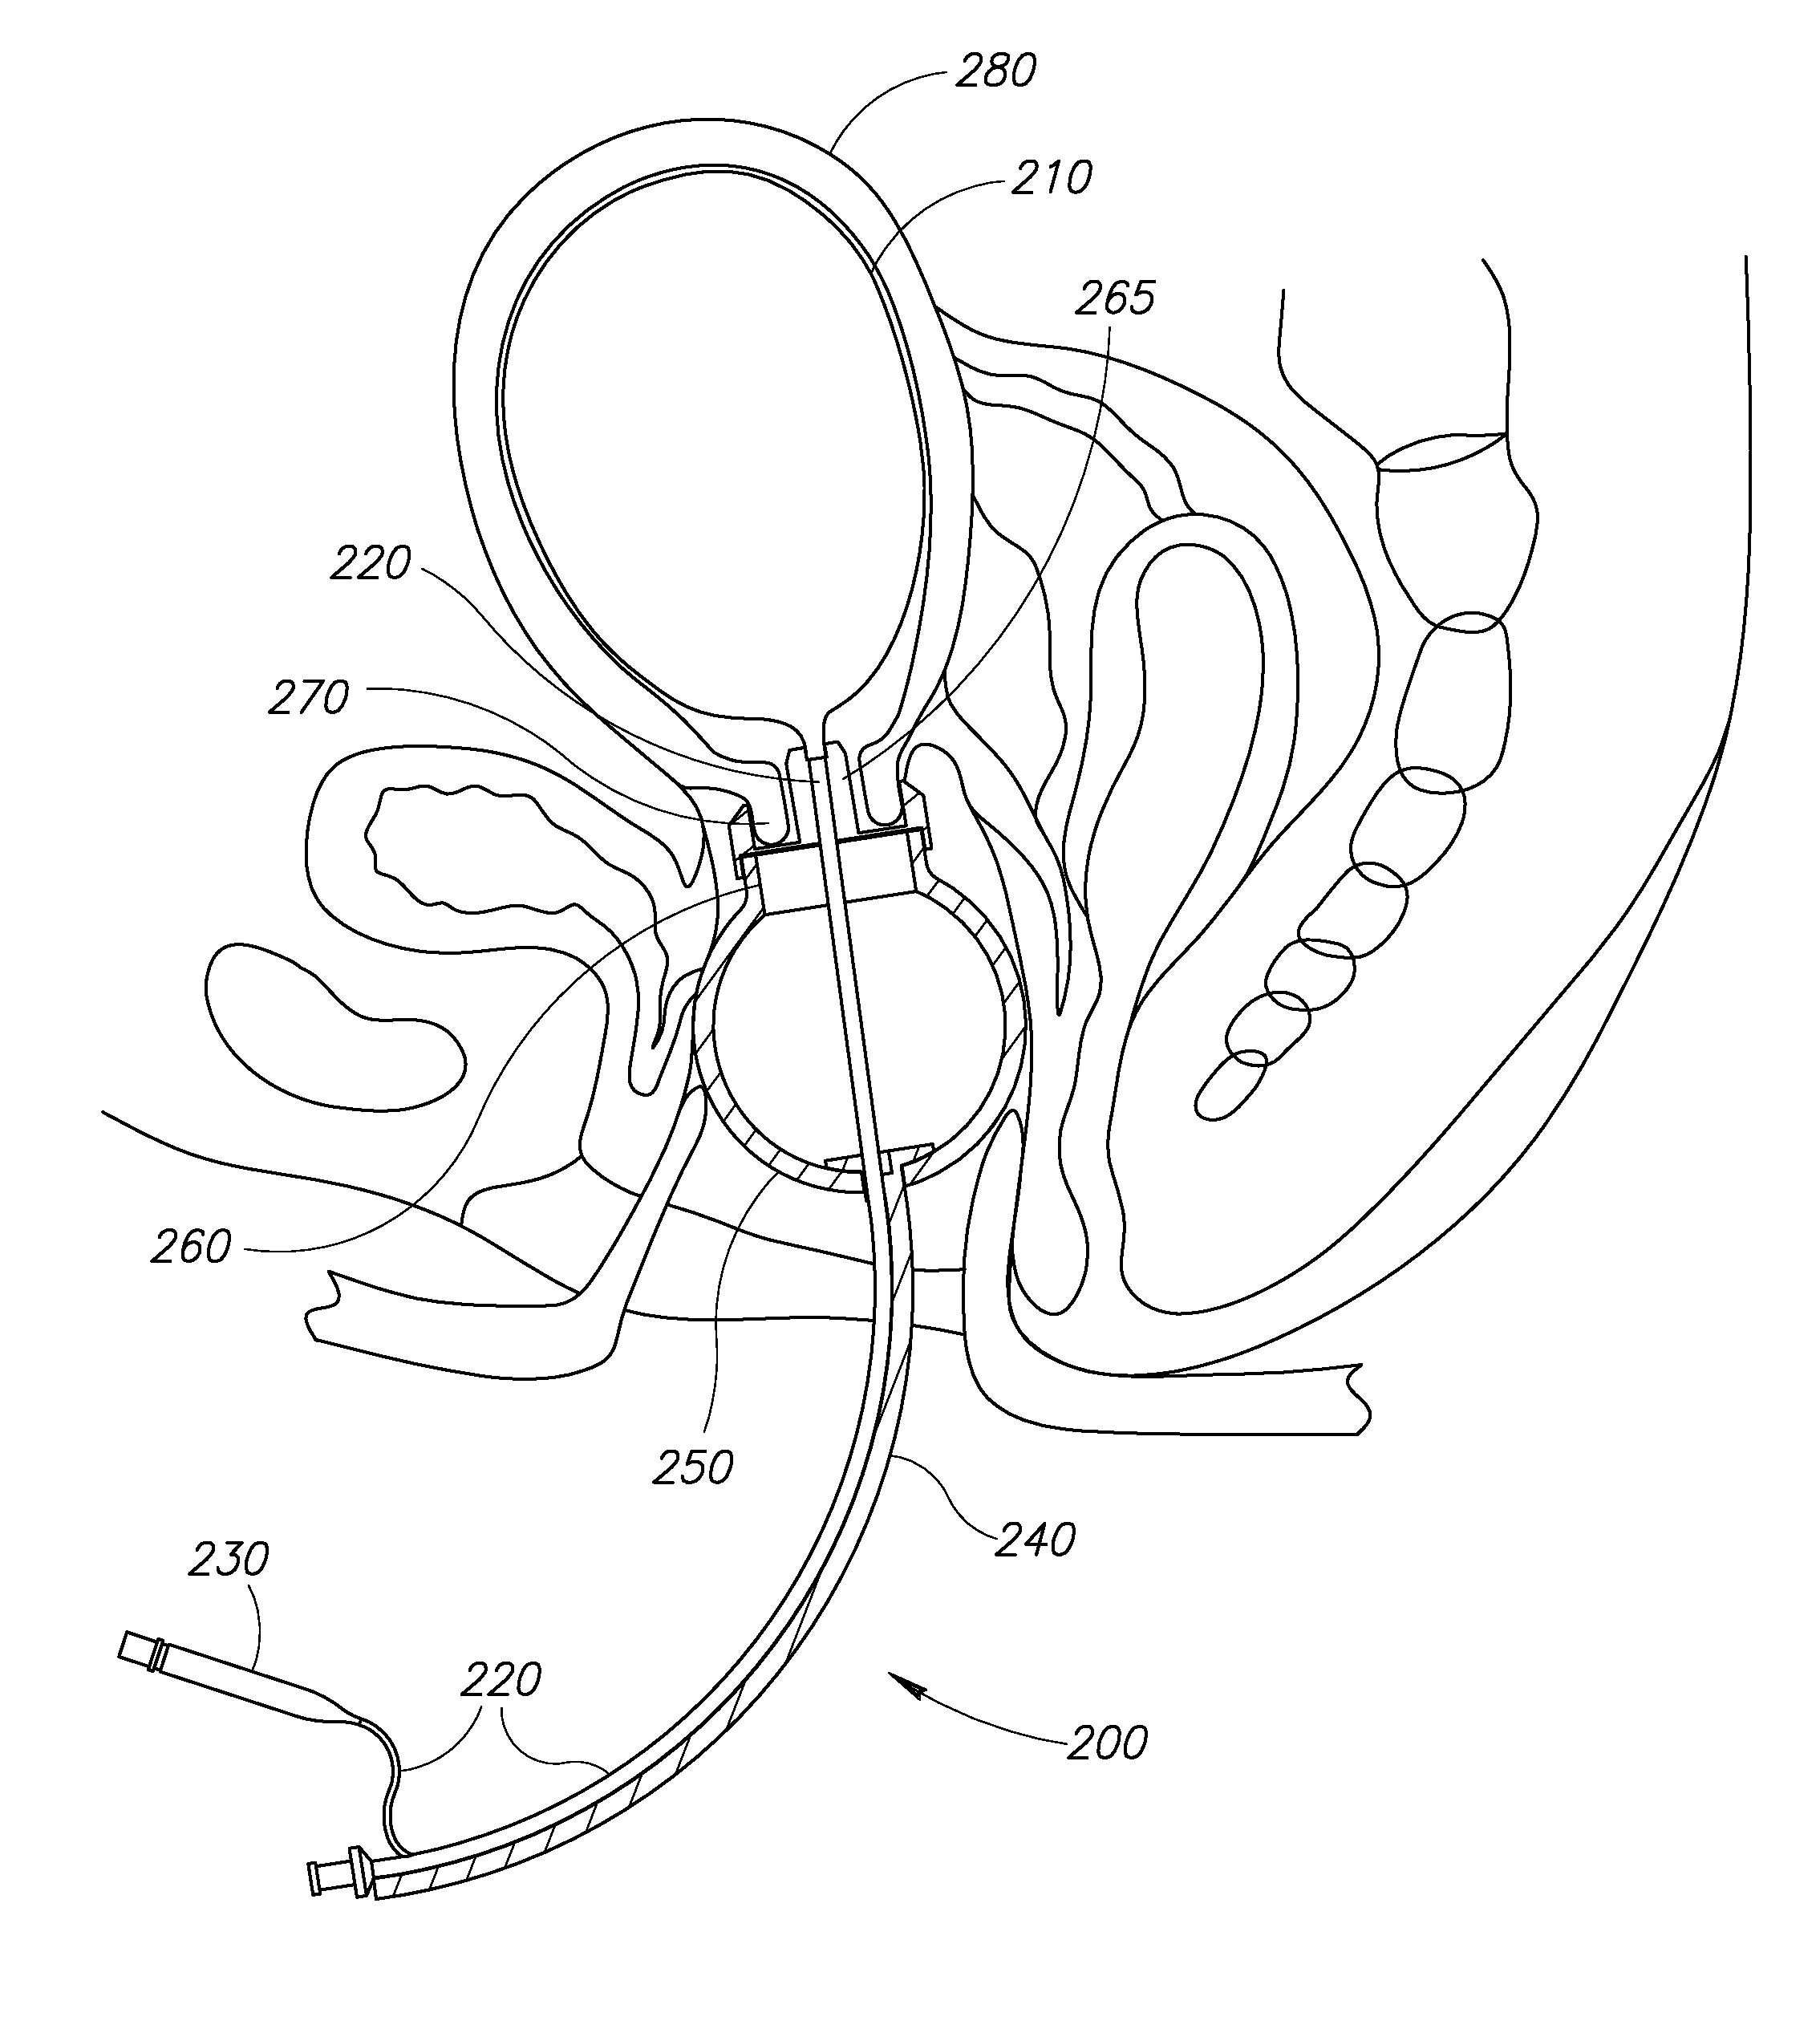 Surgical manipulation and occlusion device